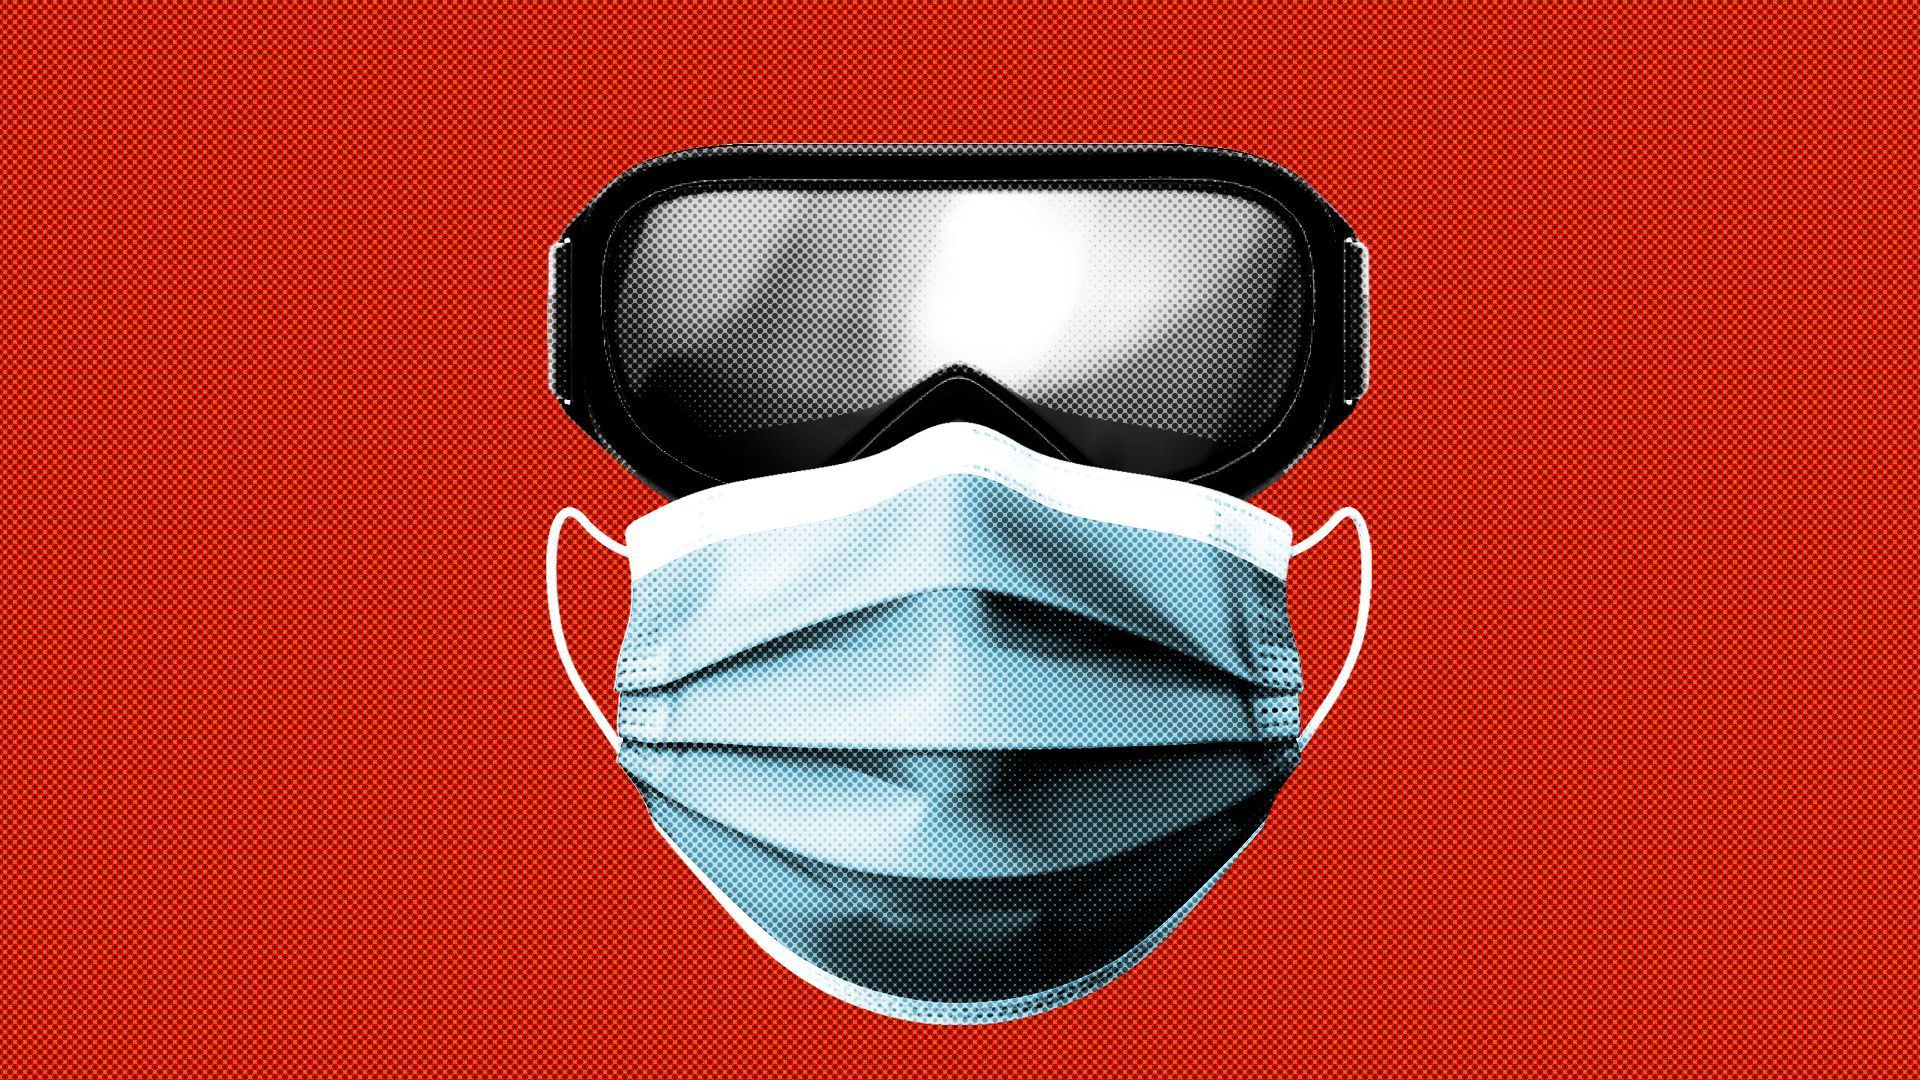 Illustration of ski goggles and a surgical mask